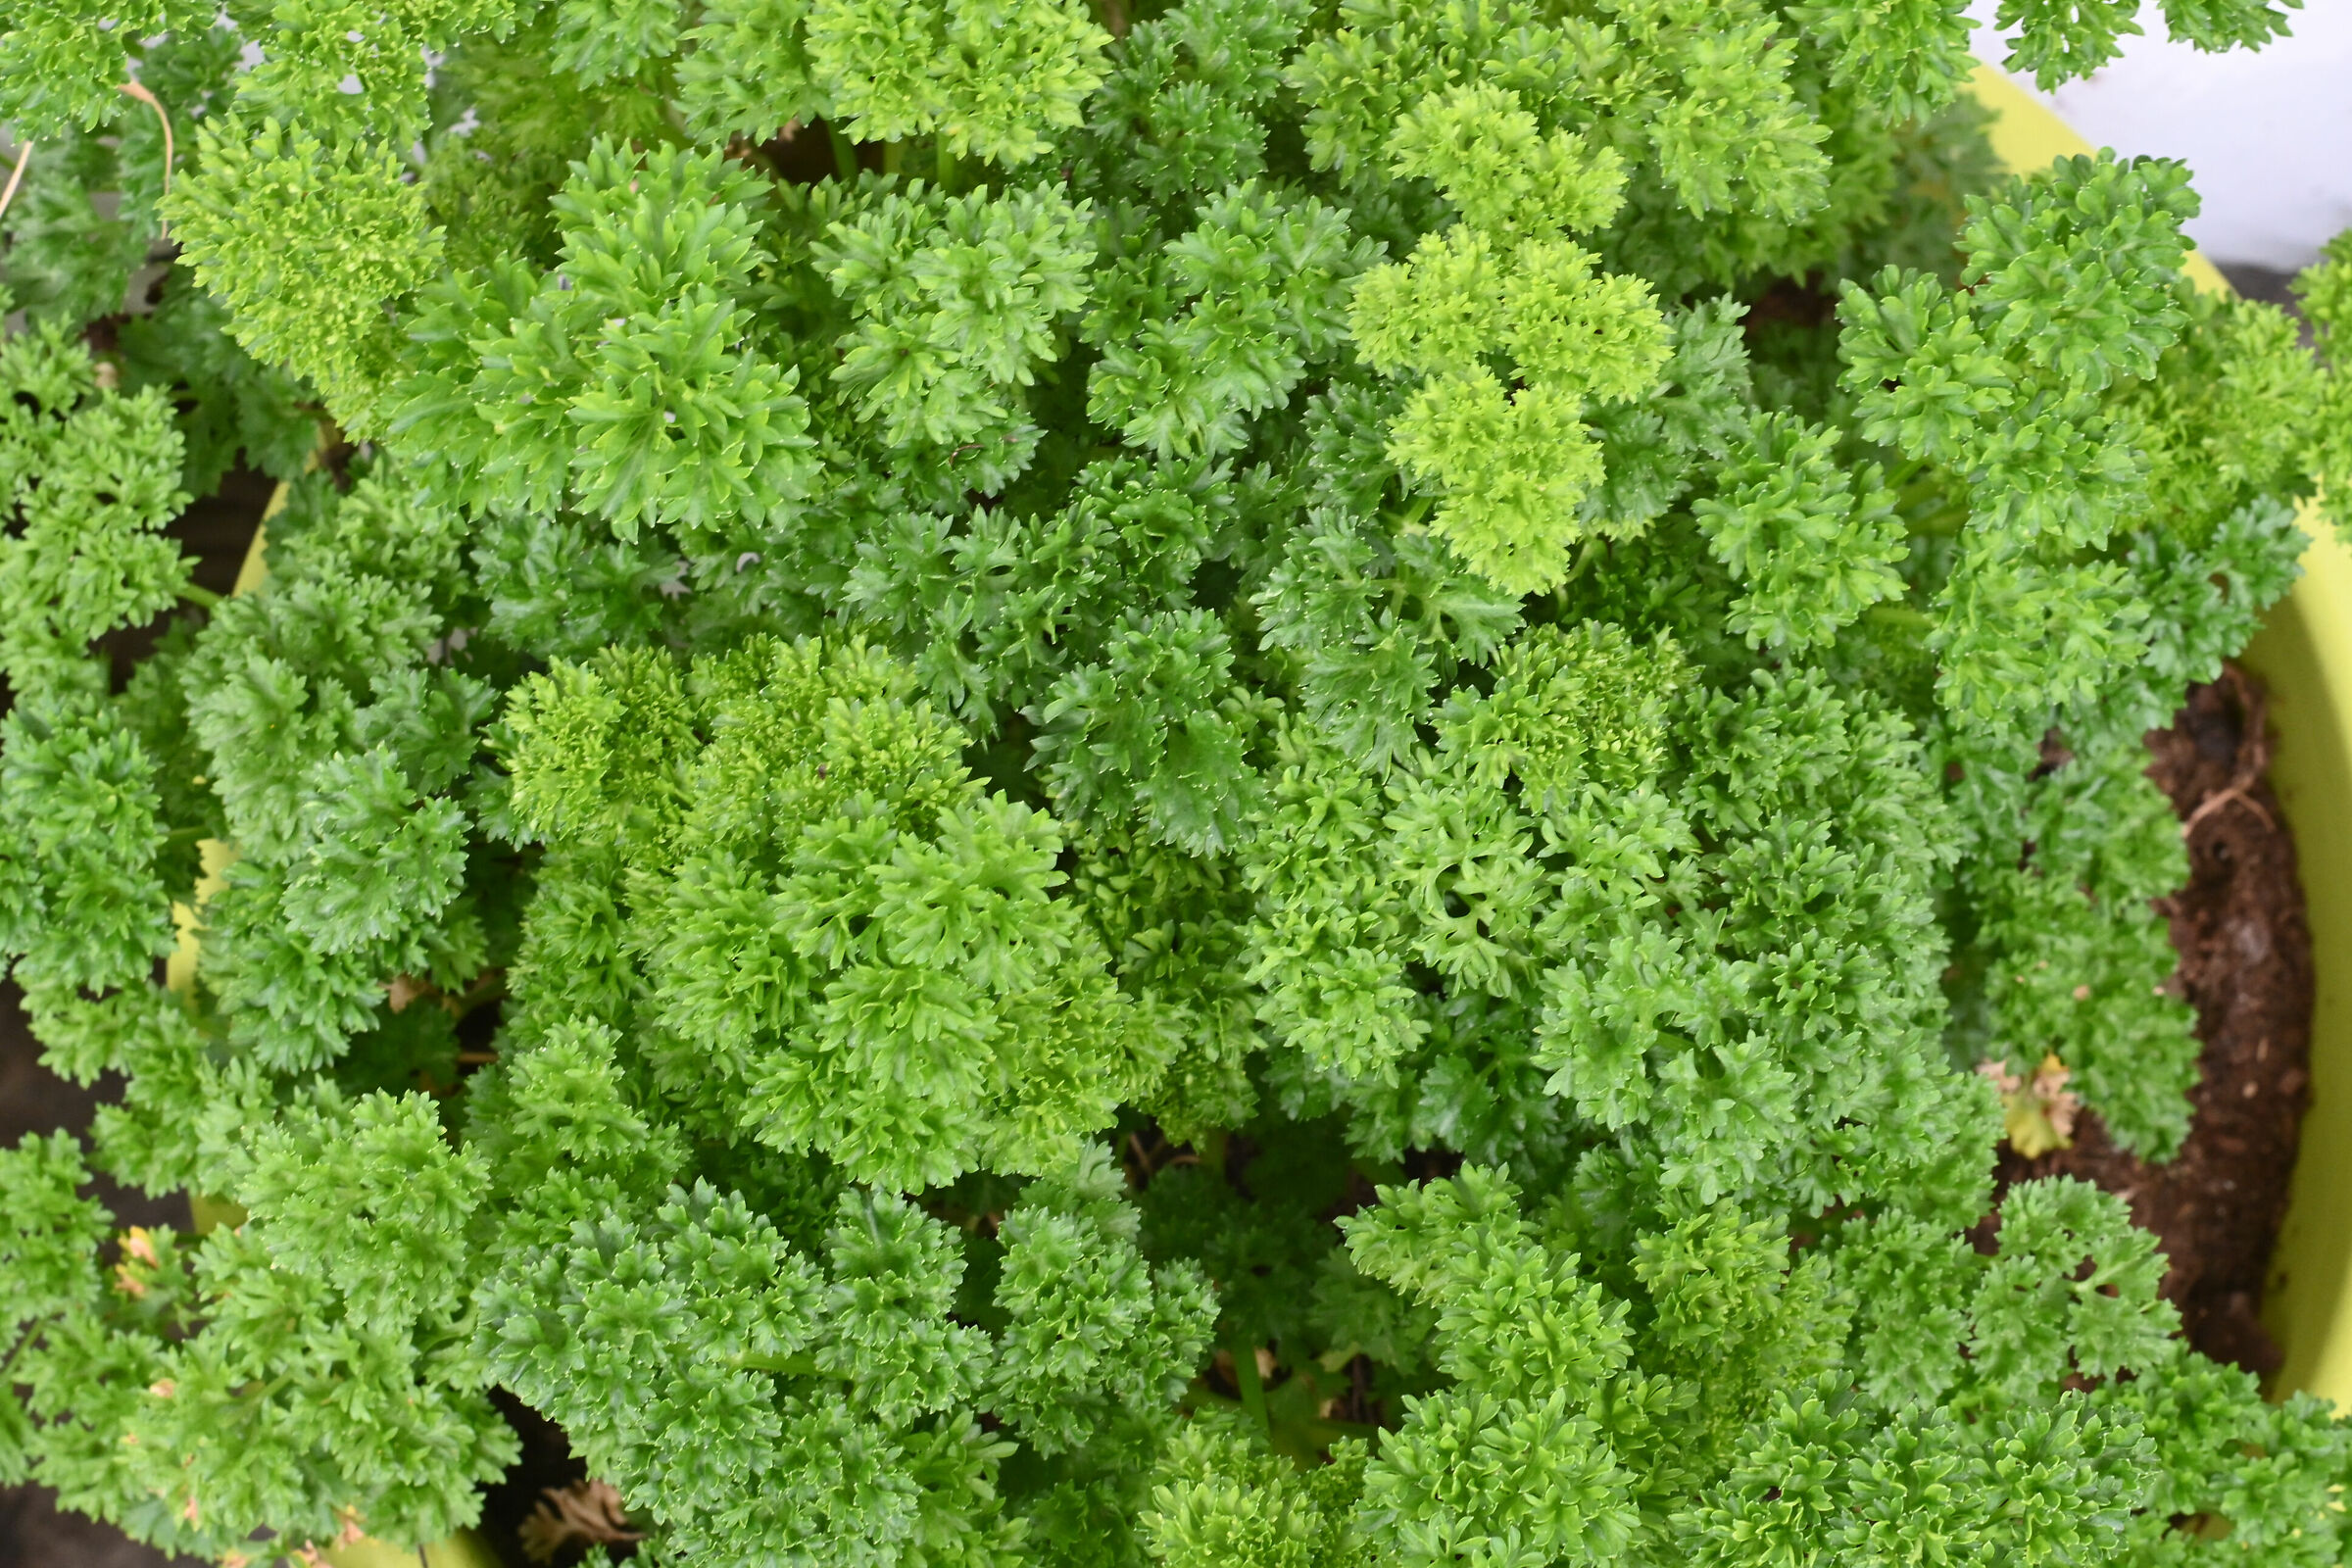 Curly parsley...